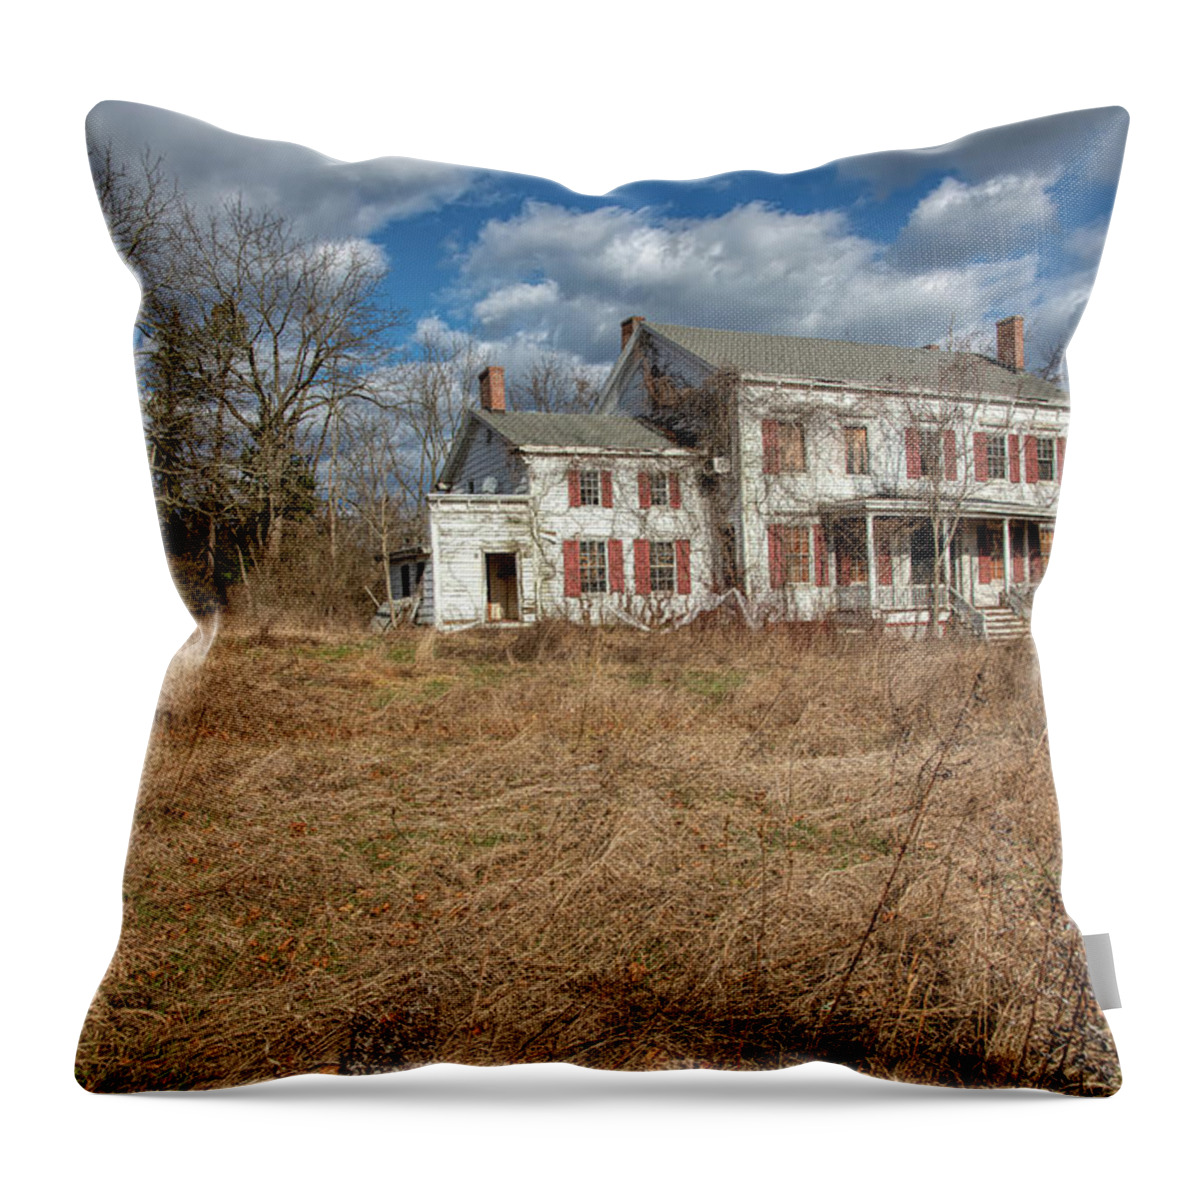 Haunted Throw Pillow featuring the photograph Haunted Farm House by David Letts